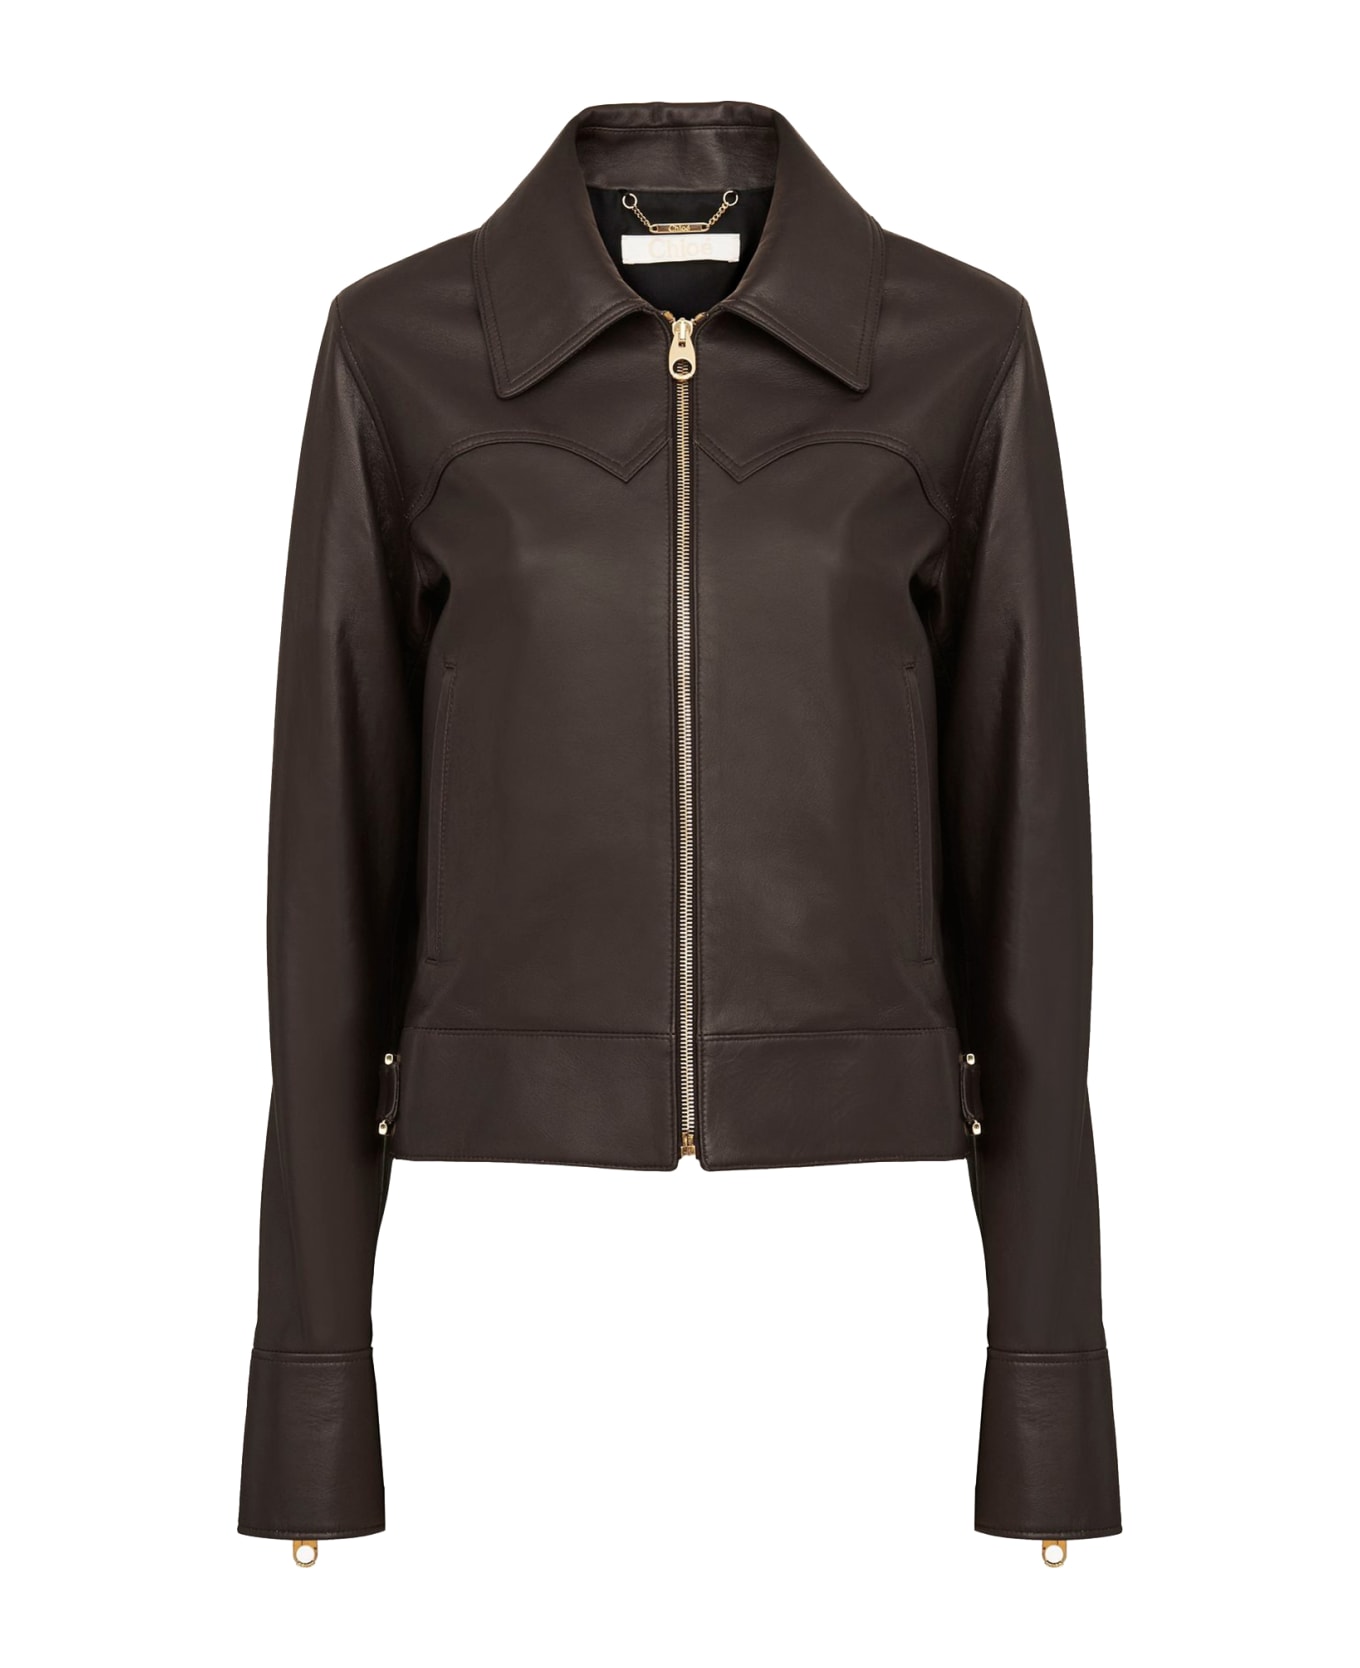 Chloé Jacket With Wide Collar In Leather - KOHL BROWN